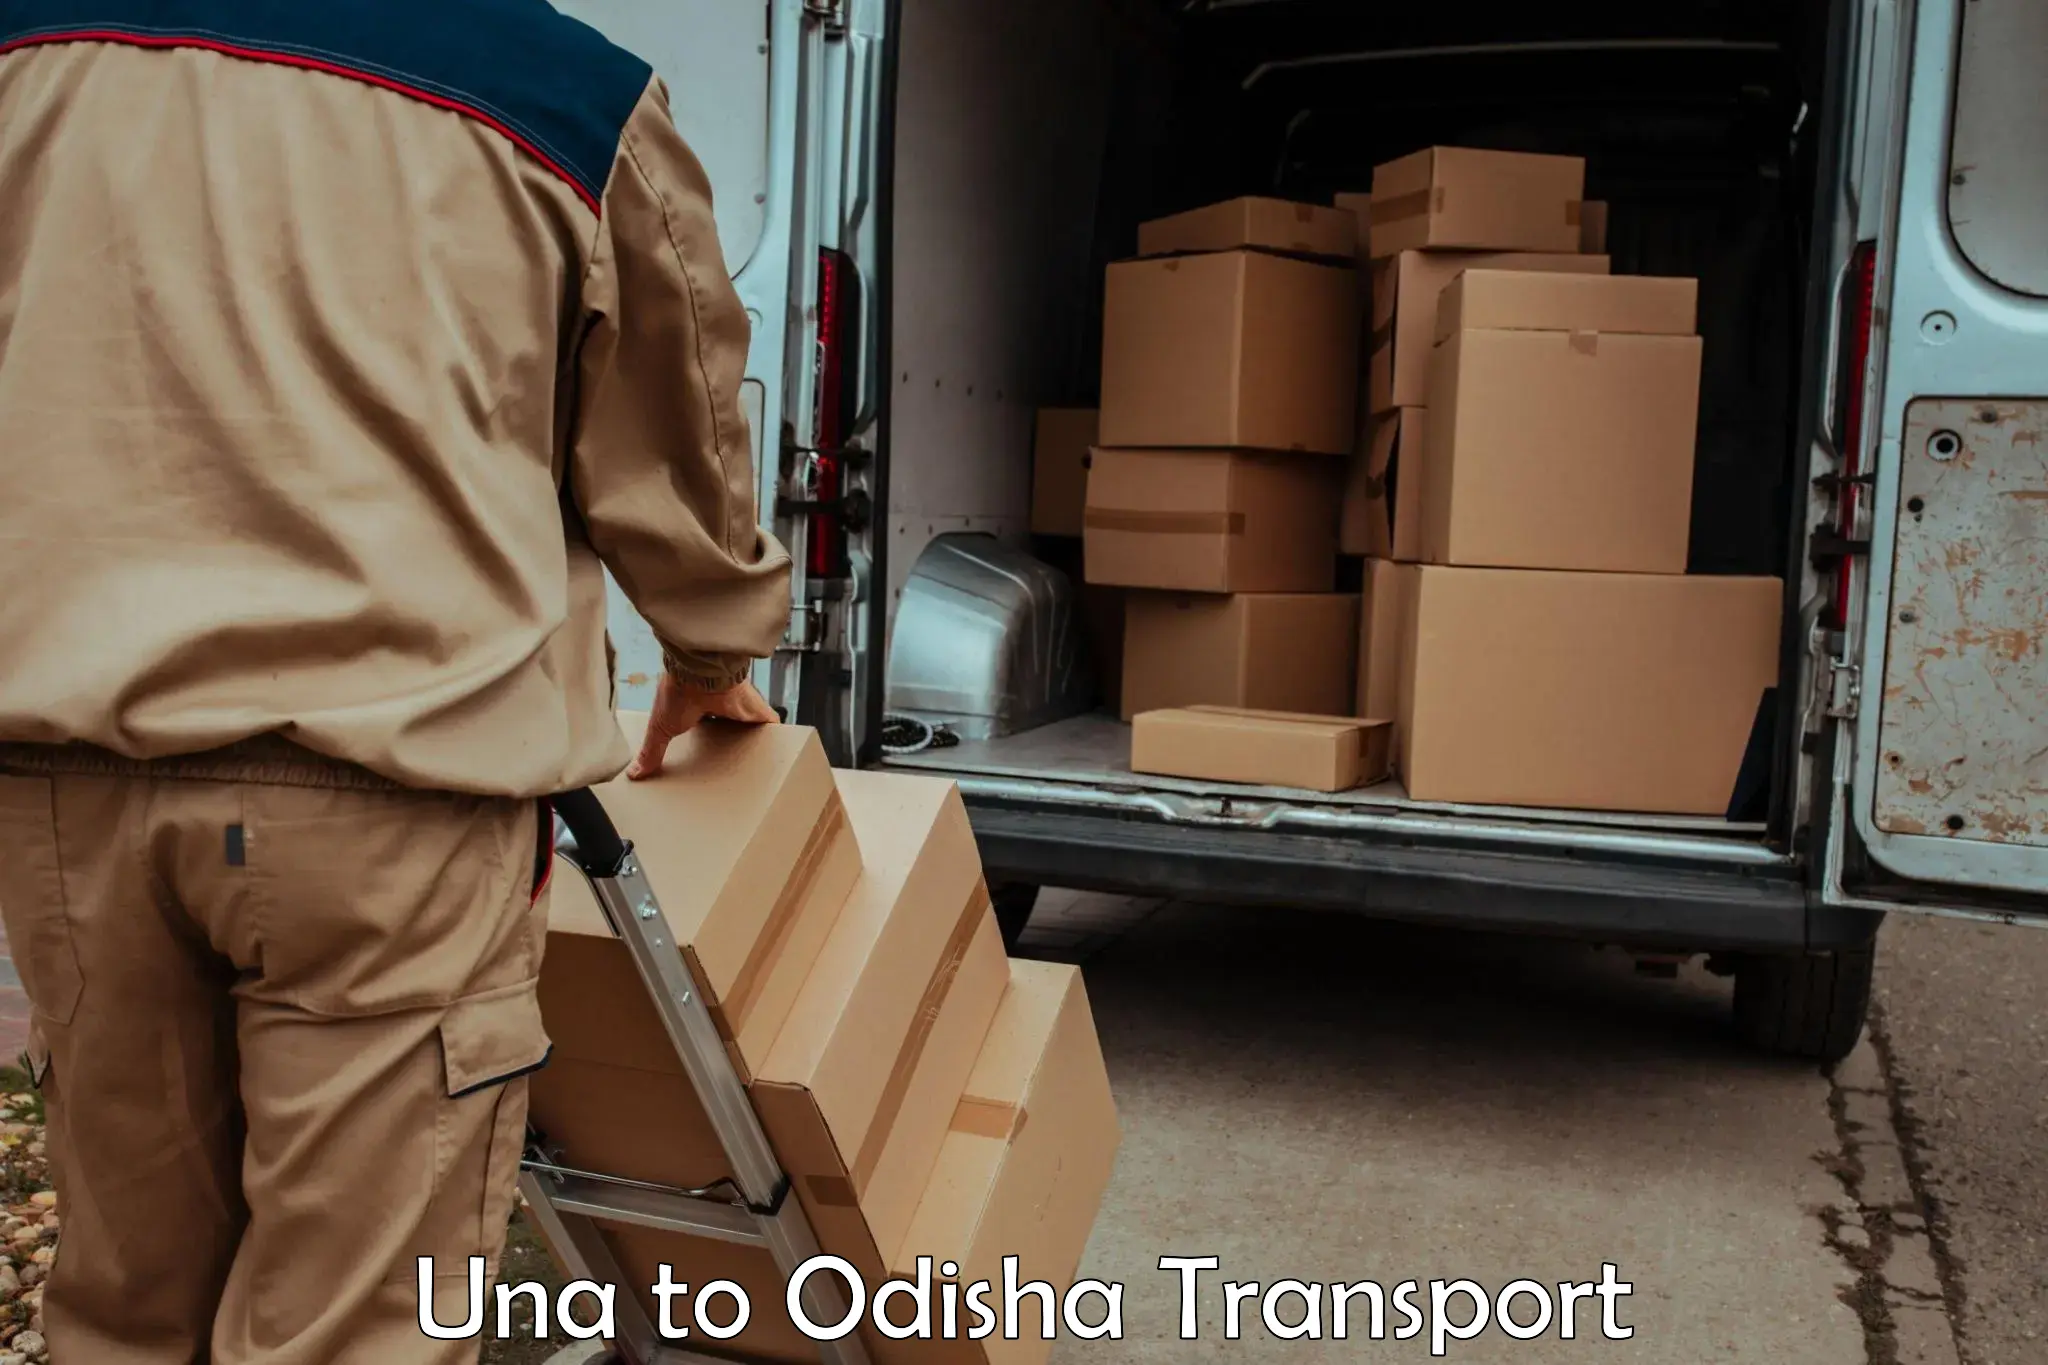 Road transport online services in Una to Mathili